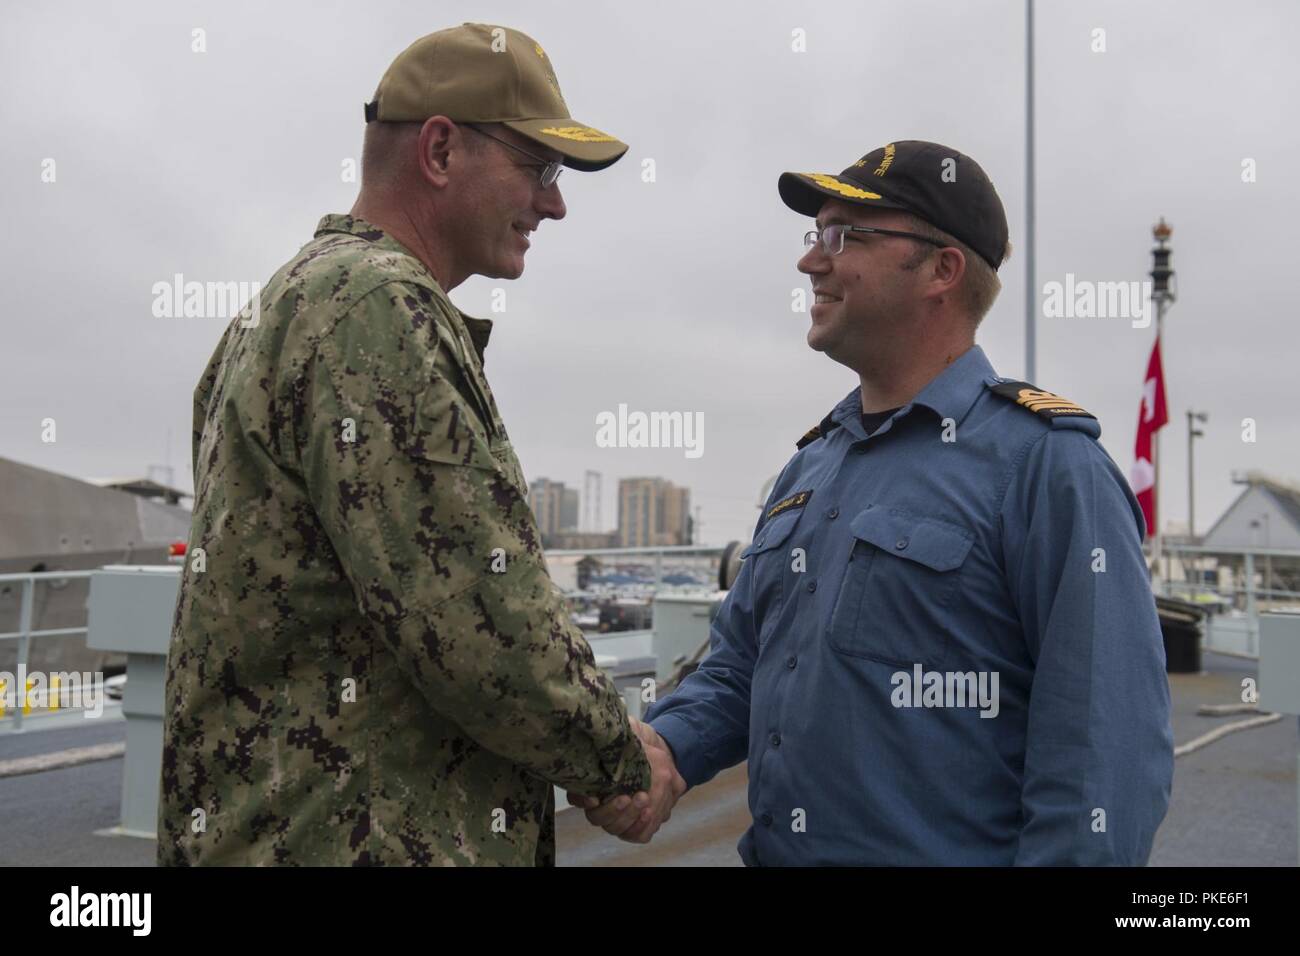 SAN DIEGO (July 26, 2018) Rear Adm. Dave Welch, commander, Task Force 177, Naval Surface and Mine Warfighting Development Center (SMWDC), is greeted by  Lt. Cmdr. Donald Thompson-Greiff, commanding officer of the Royal Canadian Navy coastal defense vessel HMCS Yellowknife (MM 706), during a visit to the ship in support of Rim of the Pacific (RIMPAC) exercise, July 26. Twenty-five nations, 46 ships, five submarines, about 200 aircraft and 25,000 personnel are participating in RIMPAC from June 27 to Aug. 2 in and around the Hawaiian Islands and Southern California. The world’s largest internatio Stock Photo